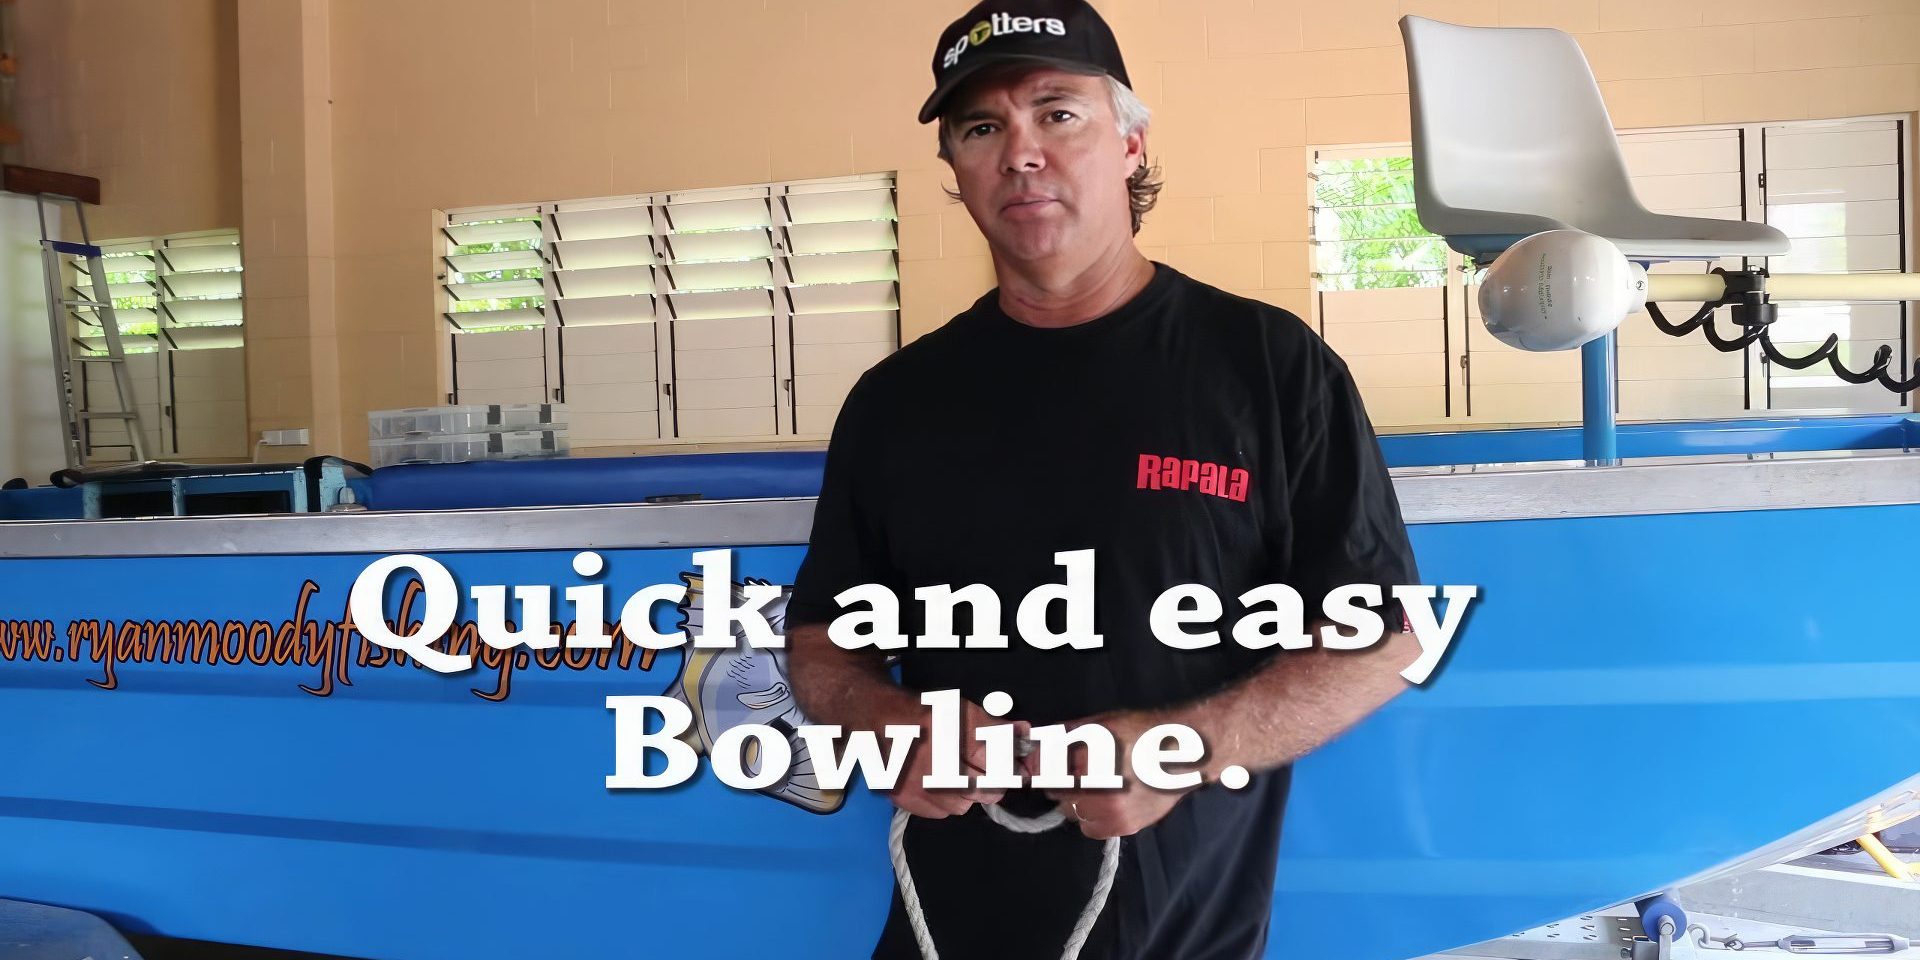 How to tie a bowline knot that won't tighten on itself - Ryan Moody Fishing